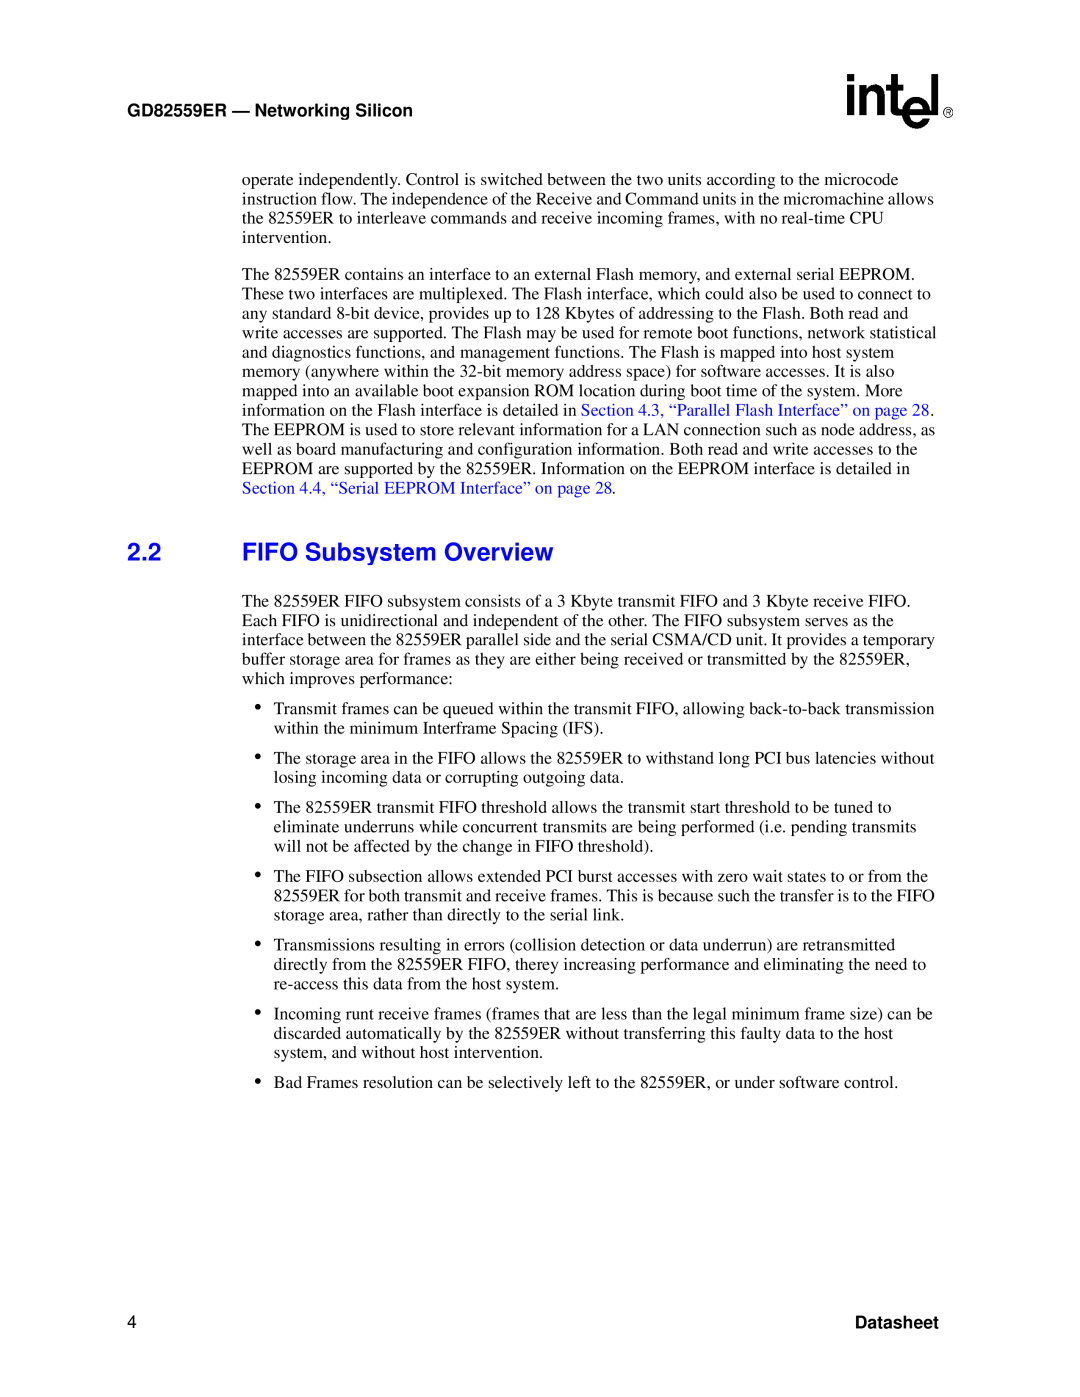 Intel manual FIFO Subsystem Overview, GD82559ER - Networkin g Silicon, Datasheet 